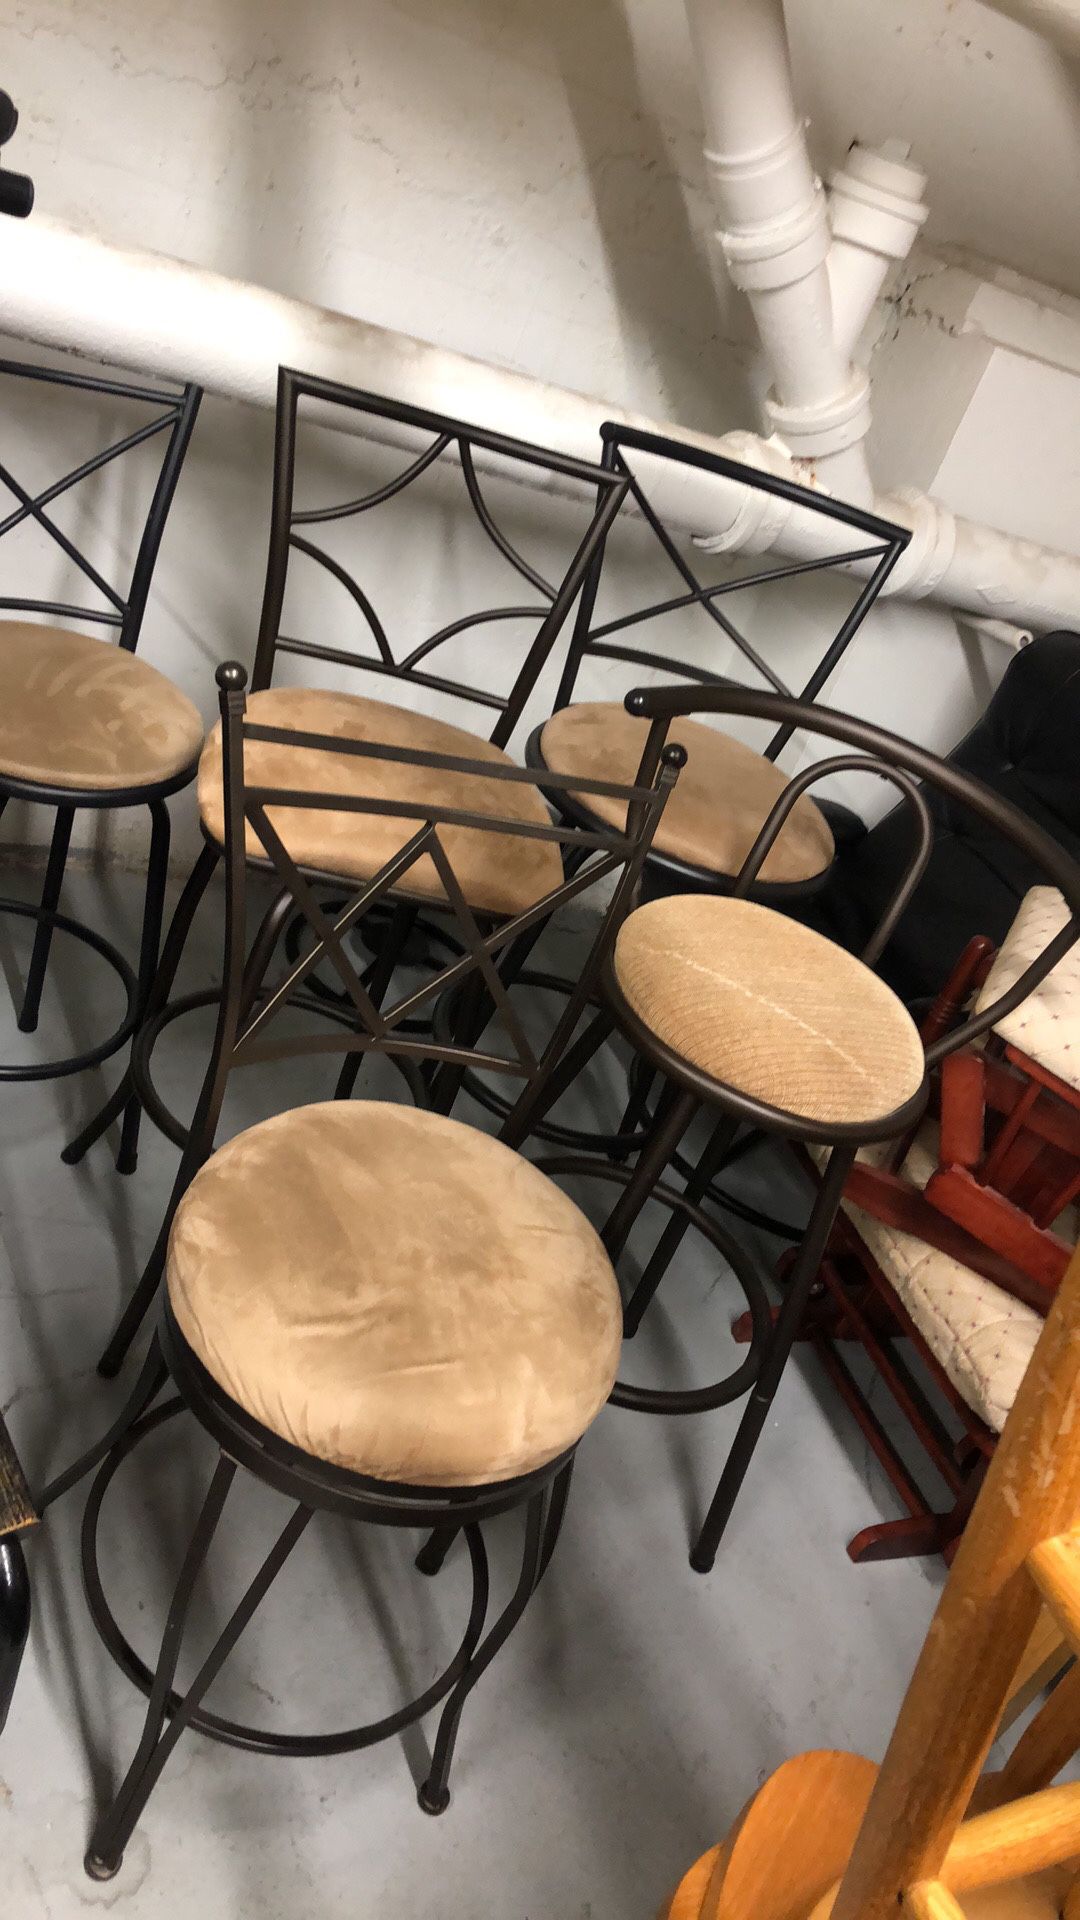 Stools chairs $30 each